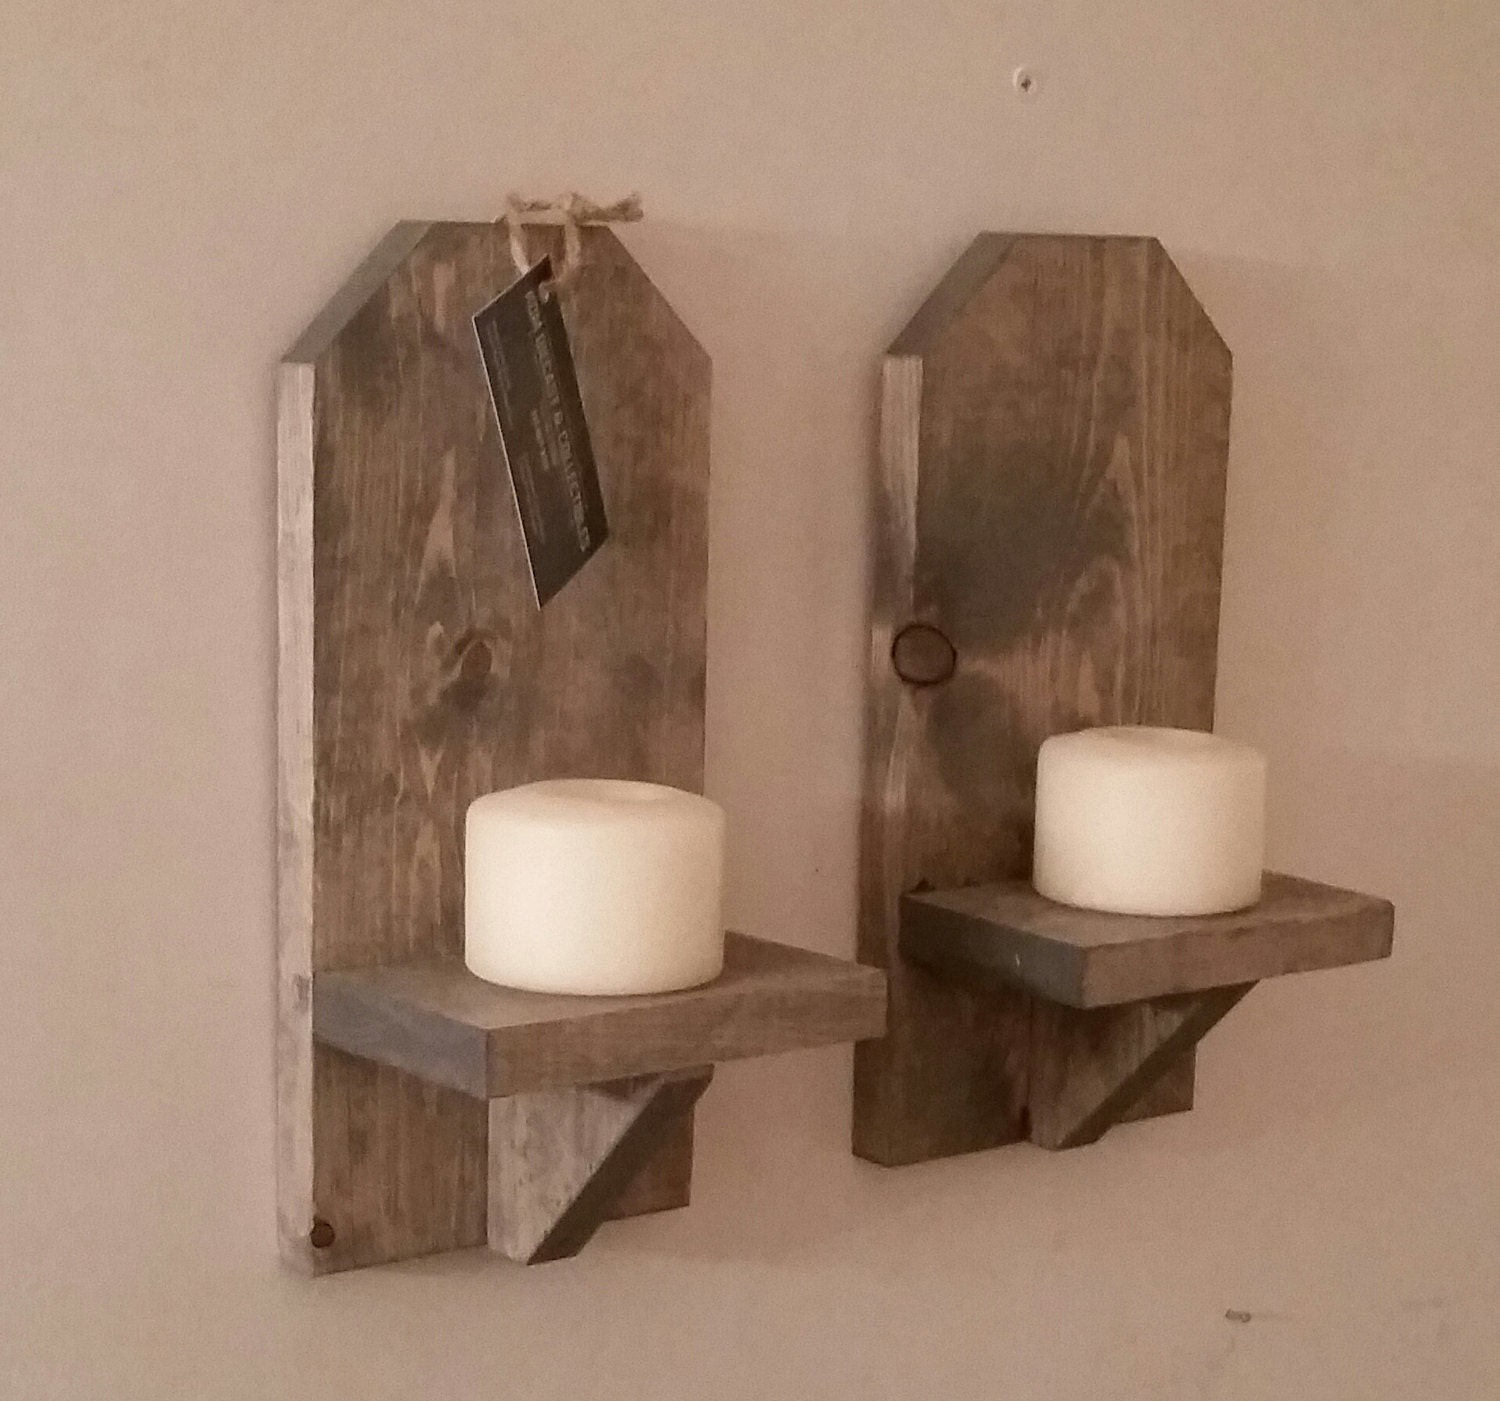 Rustic Wood Wall Sconce (Pair) // 12 Wall Sconce // Shelf ... on Wooden Wall Sconce Shelf Decorating id=27018